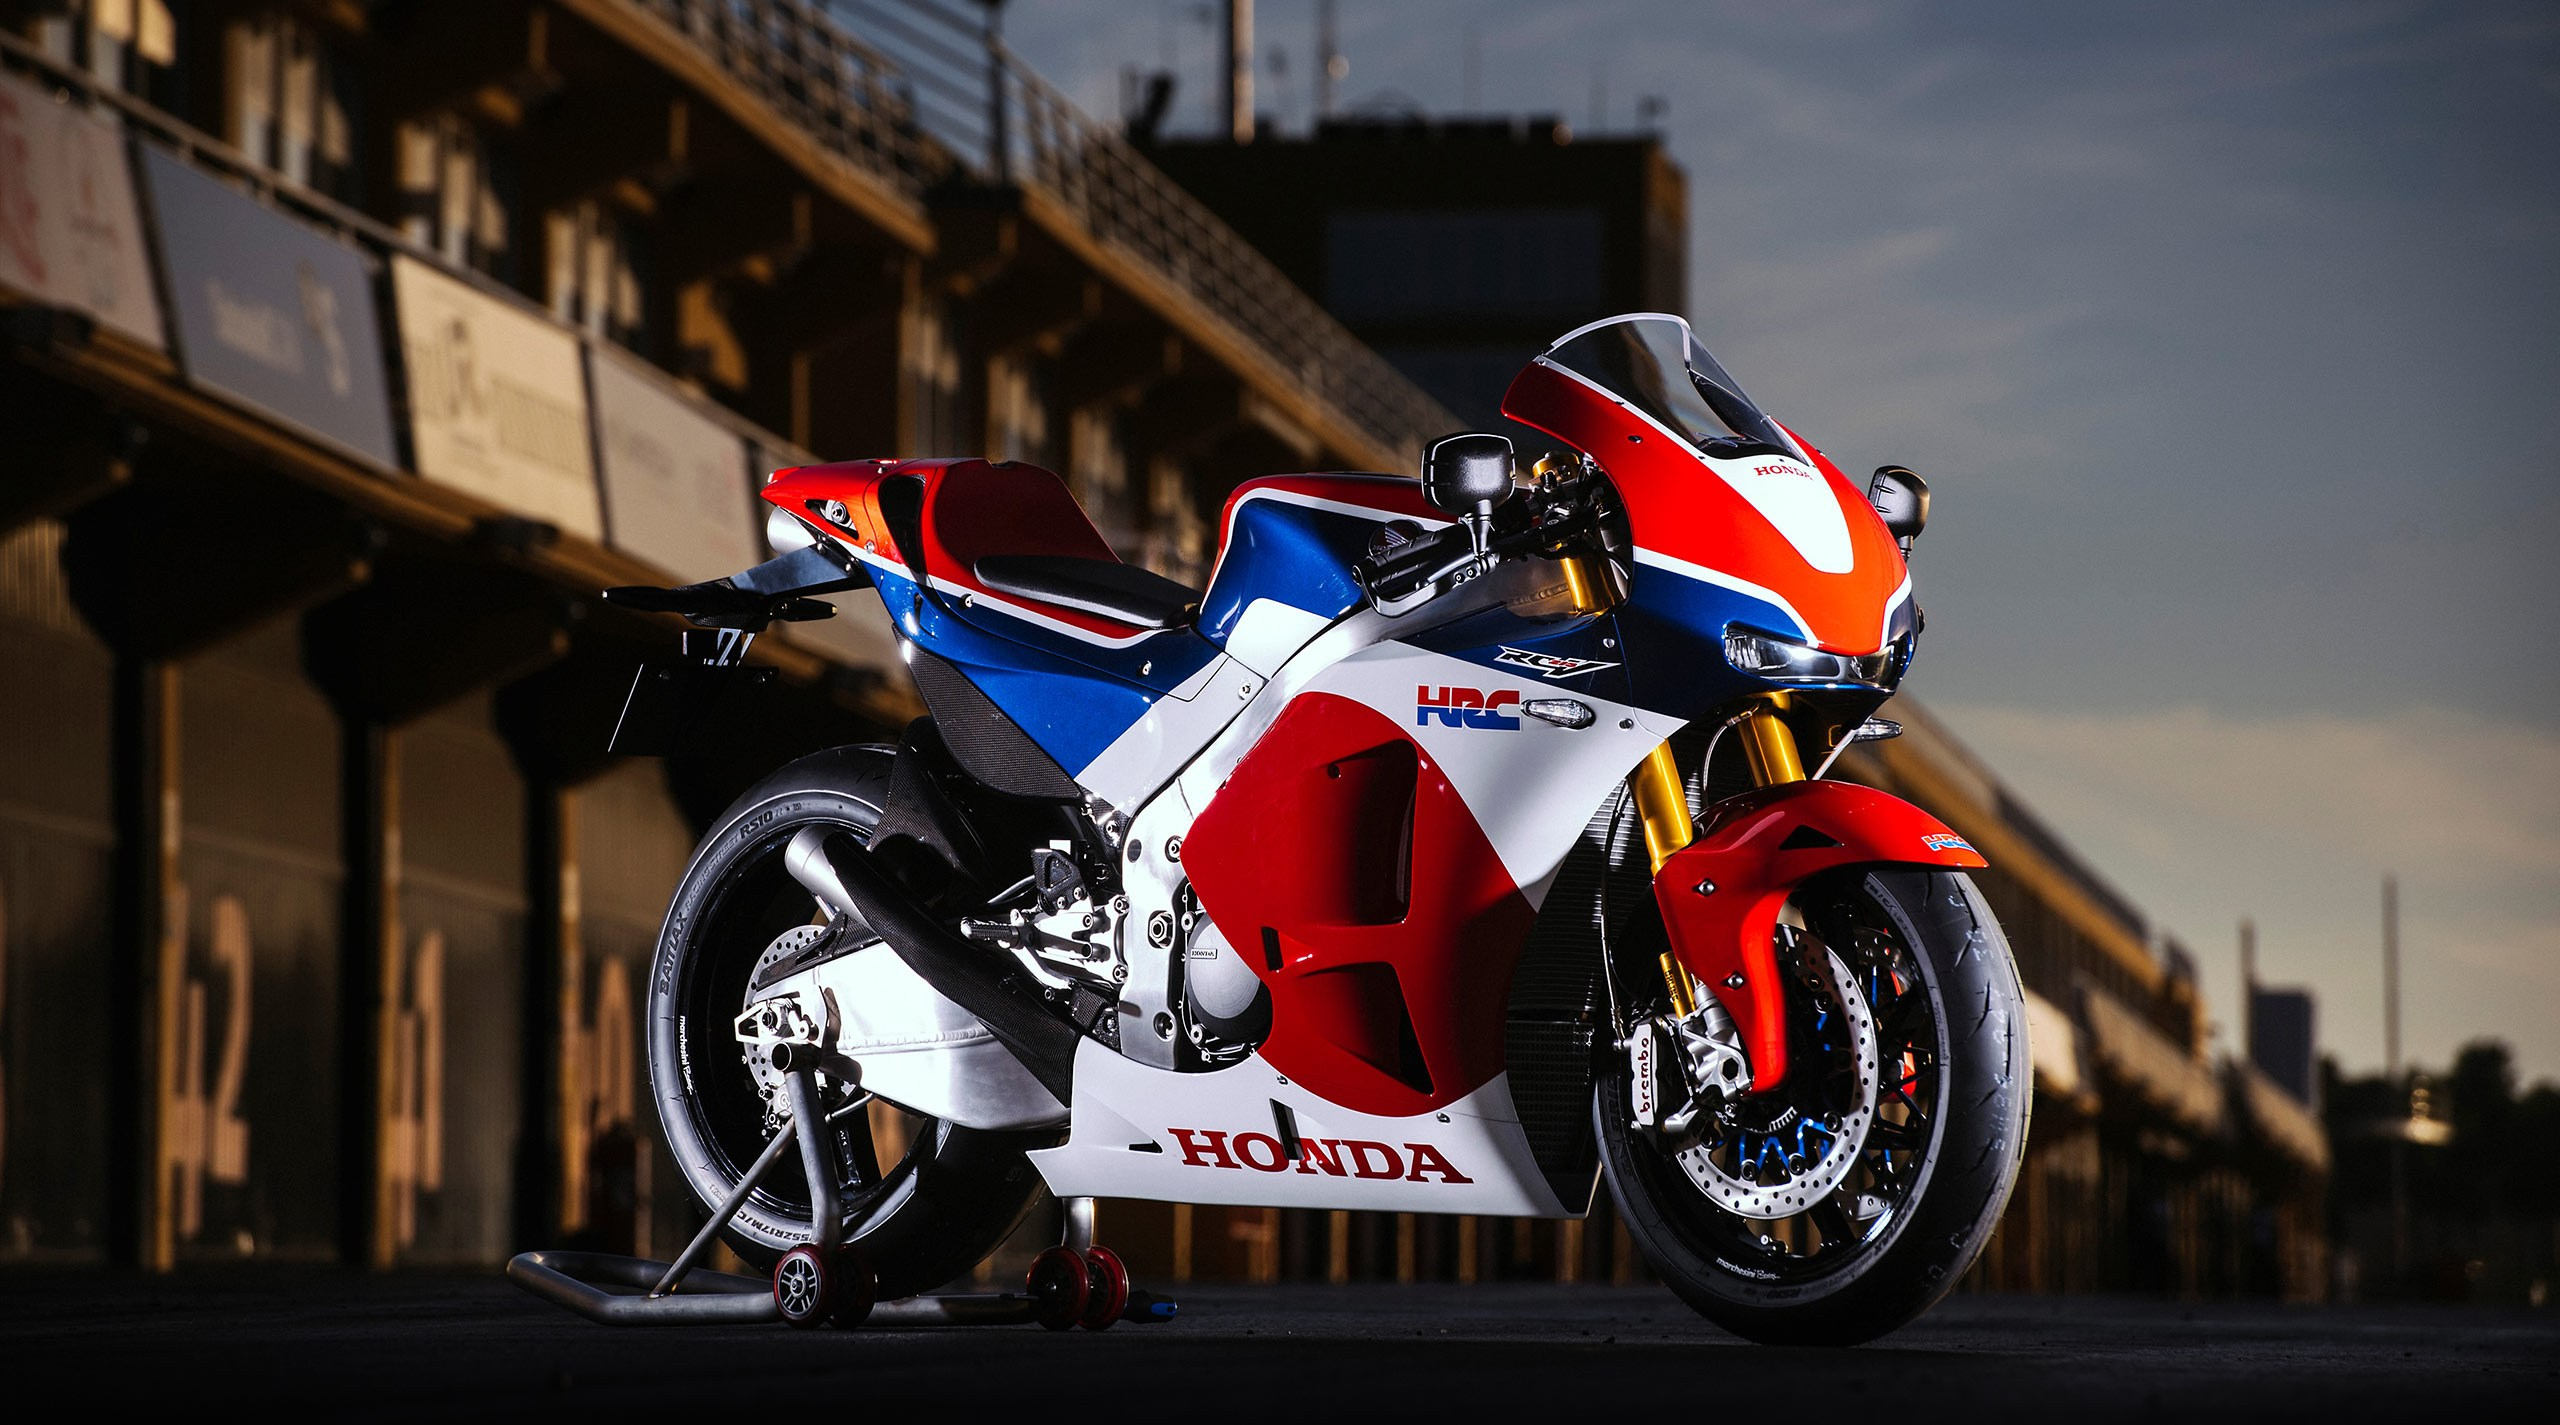 Honda Rc213v S Re And Specs At Release Car